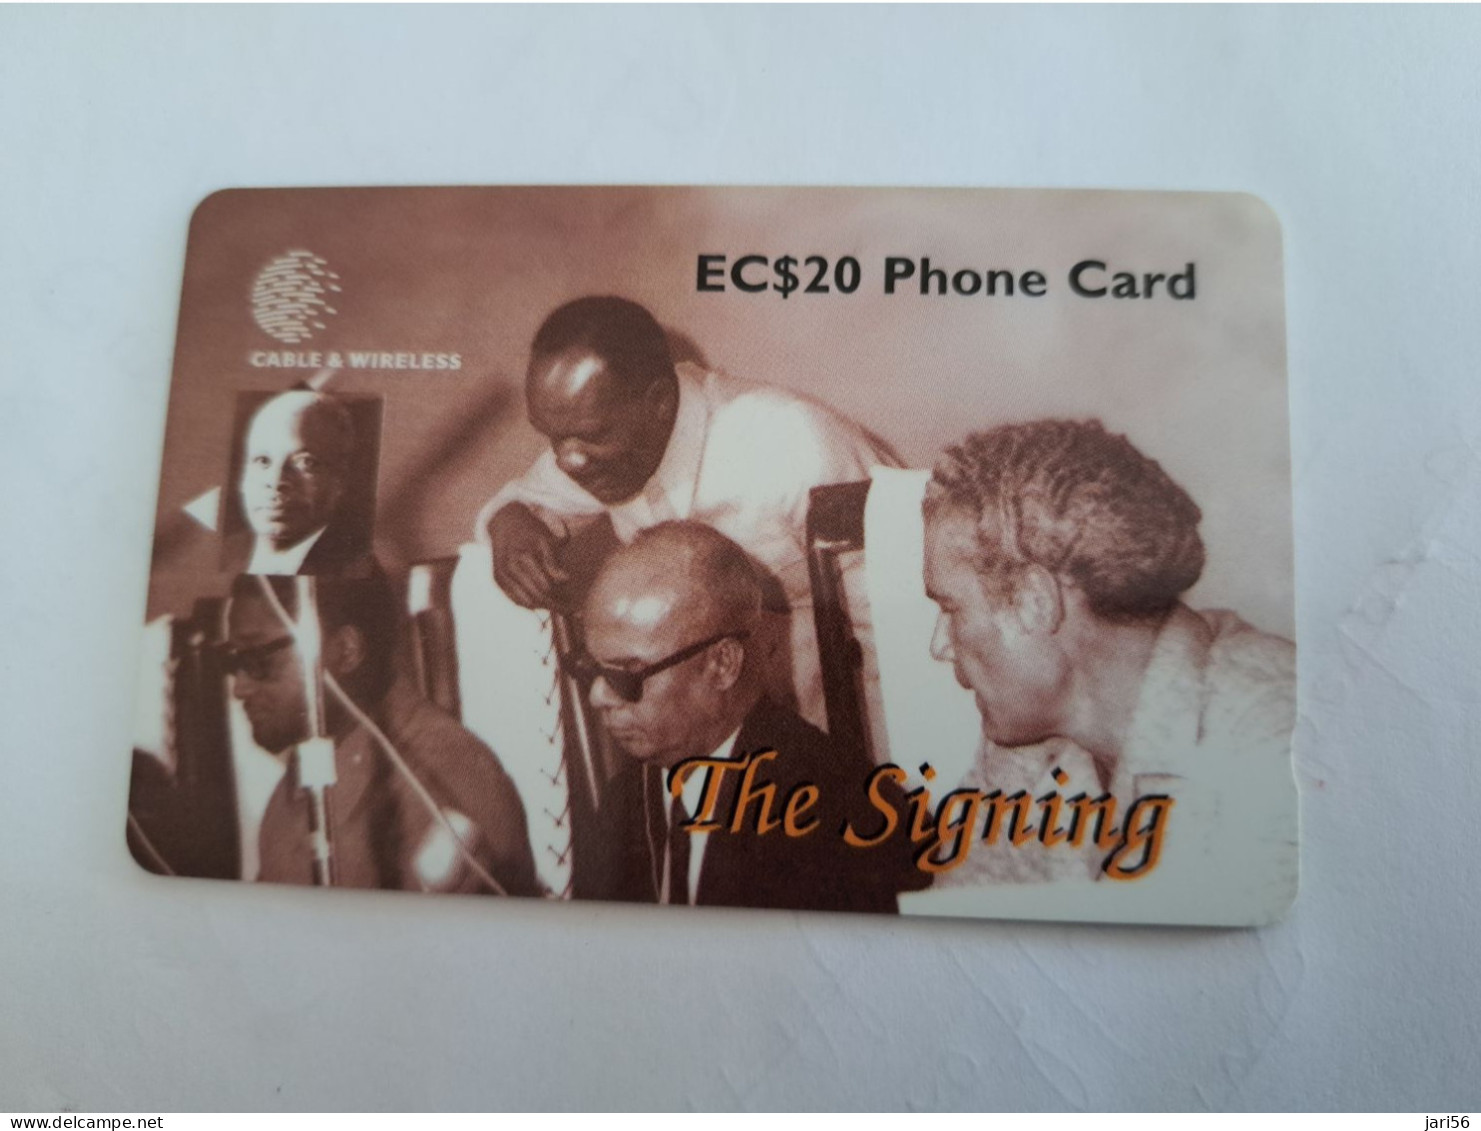 ST LUCIA    $ 20   CABLE & WIRELESS  STL-254B  254CSLB     THE SIGNING   Fine Used Card ** 14273** - St. Lucia